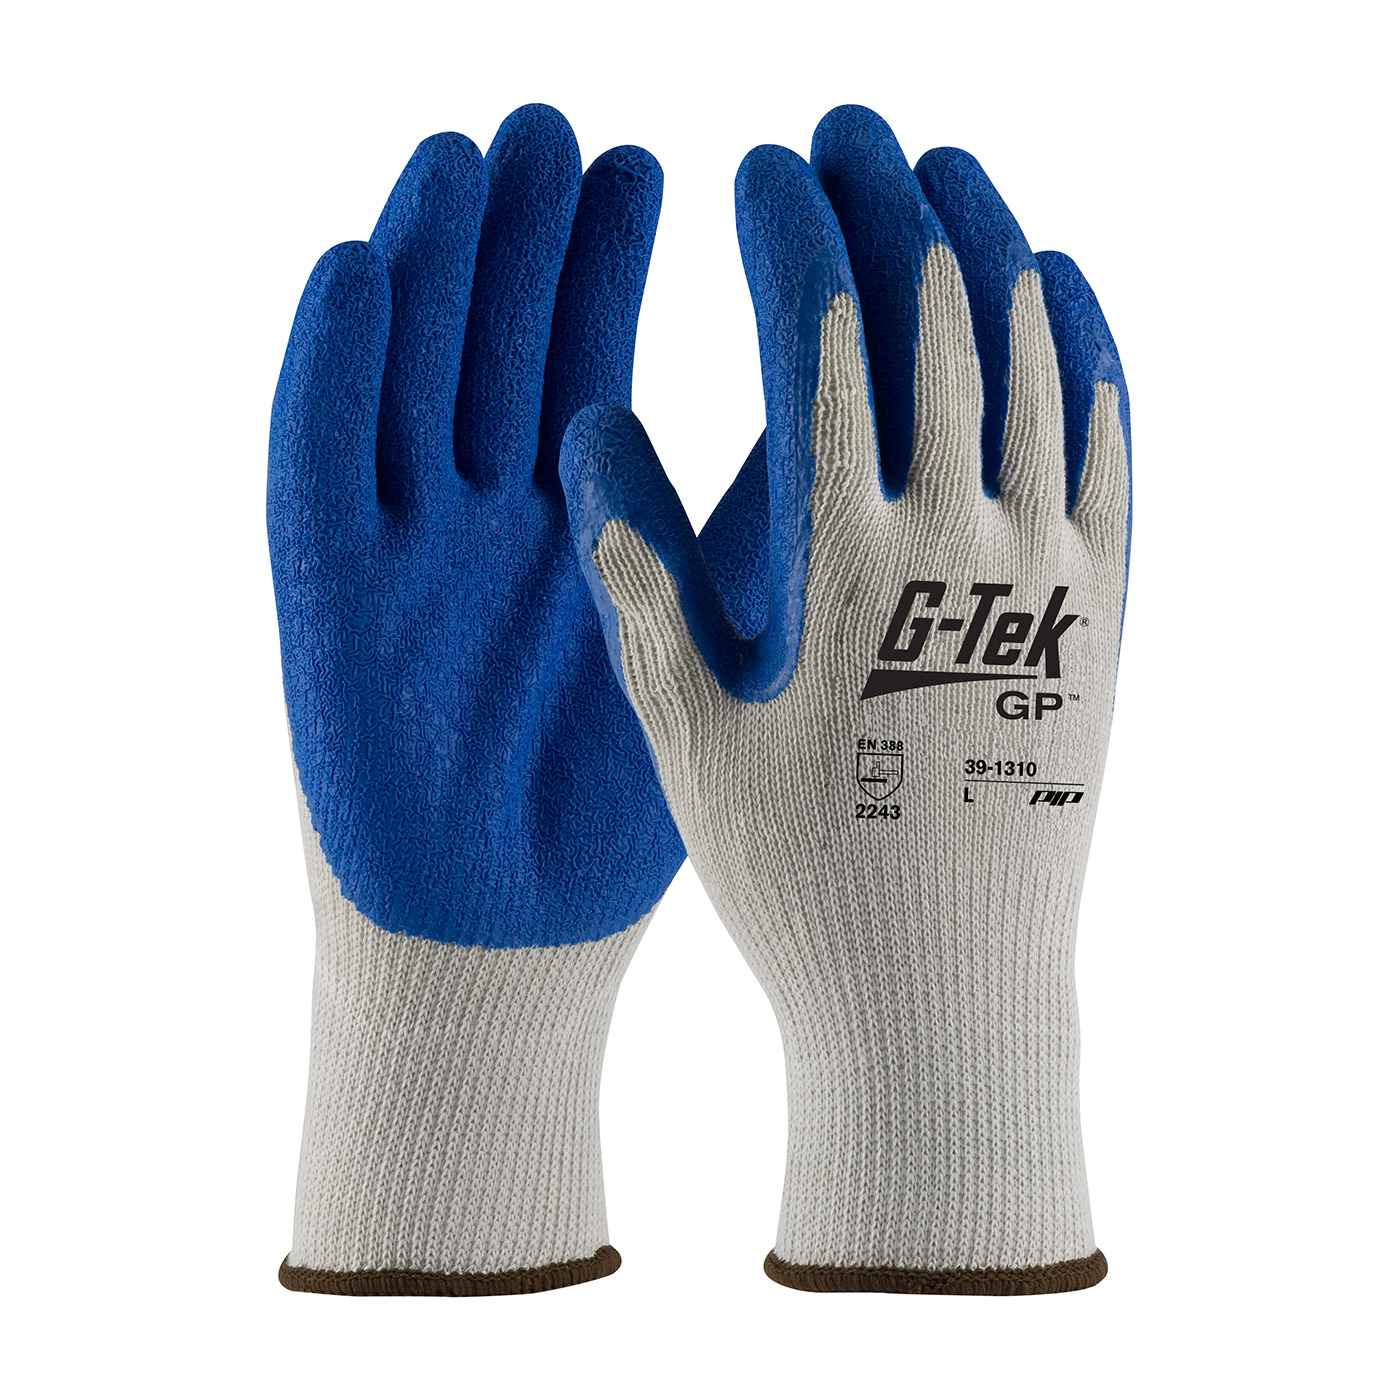 PIP 39-1310/XL G-Tek GP Seamless Knit Cotton/Polyester Glove with Latex Coated Crinkle Grip on Palm & Fingers - Economy Grade - X-Large PID-39 1310 XL